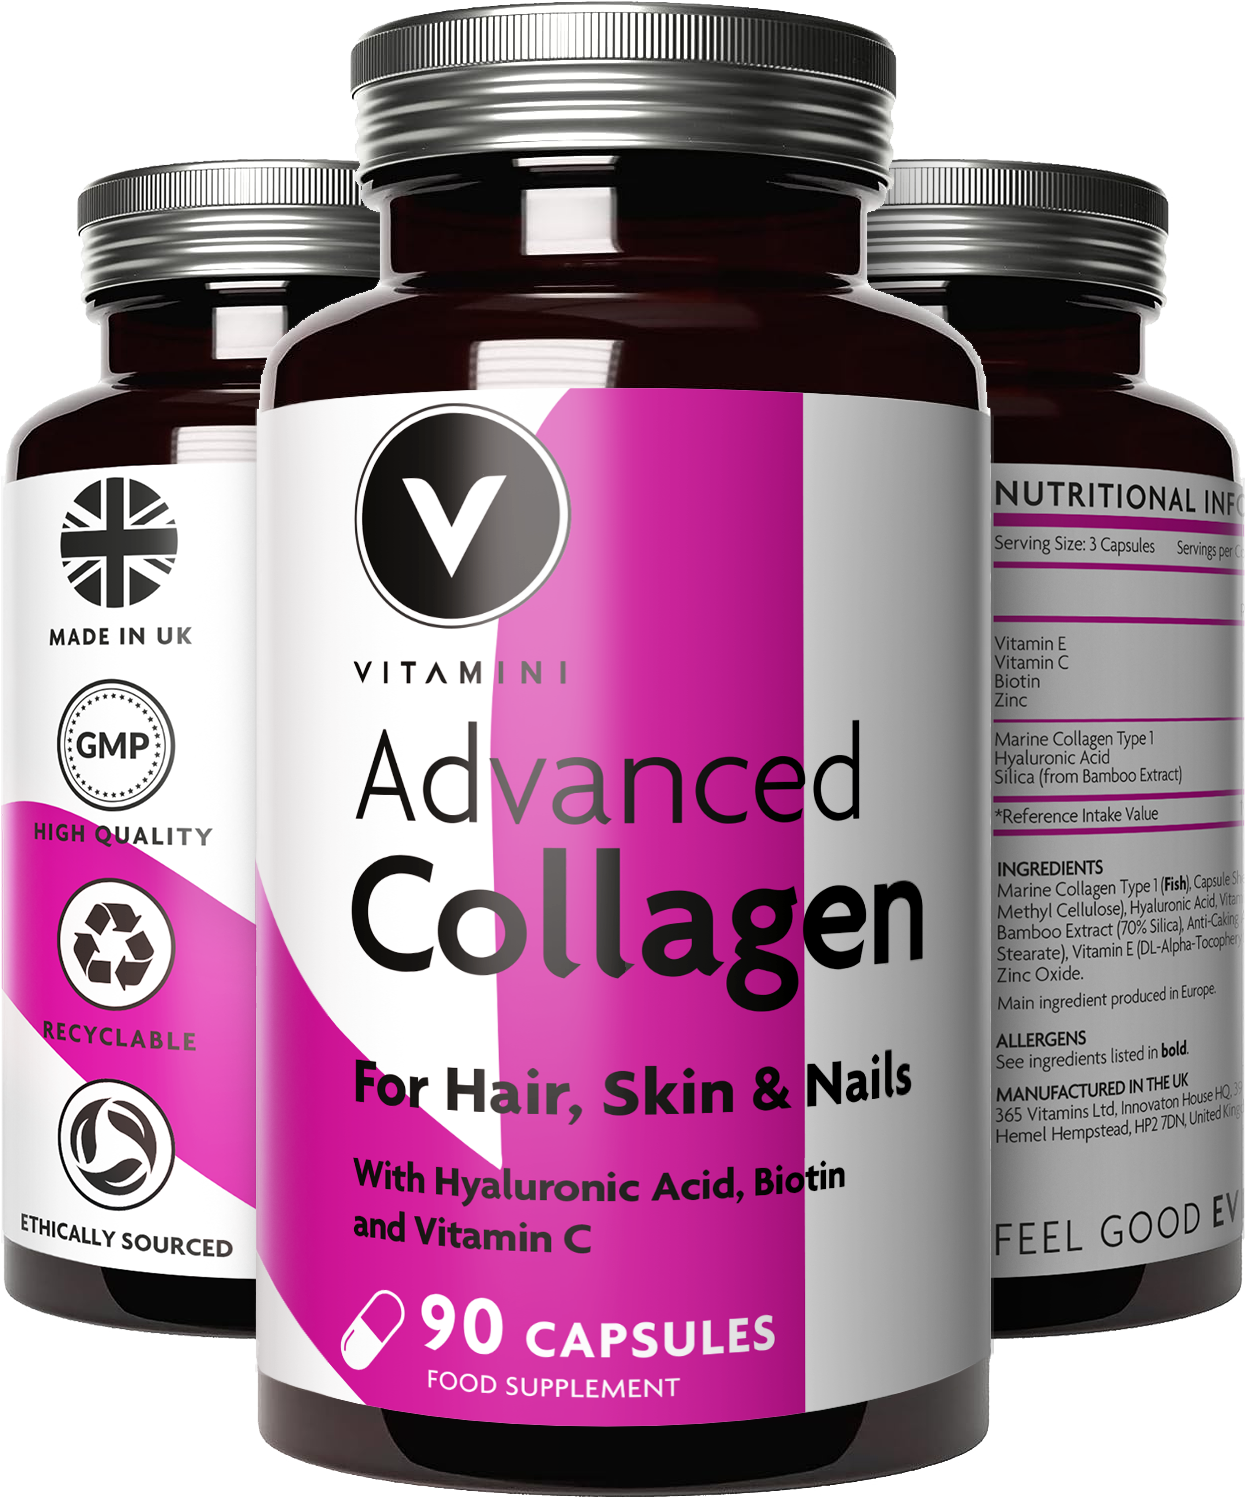 Advanced Collagen for Hair, Skin & Nails